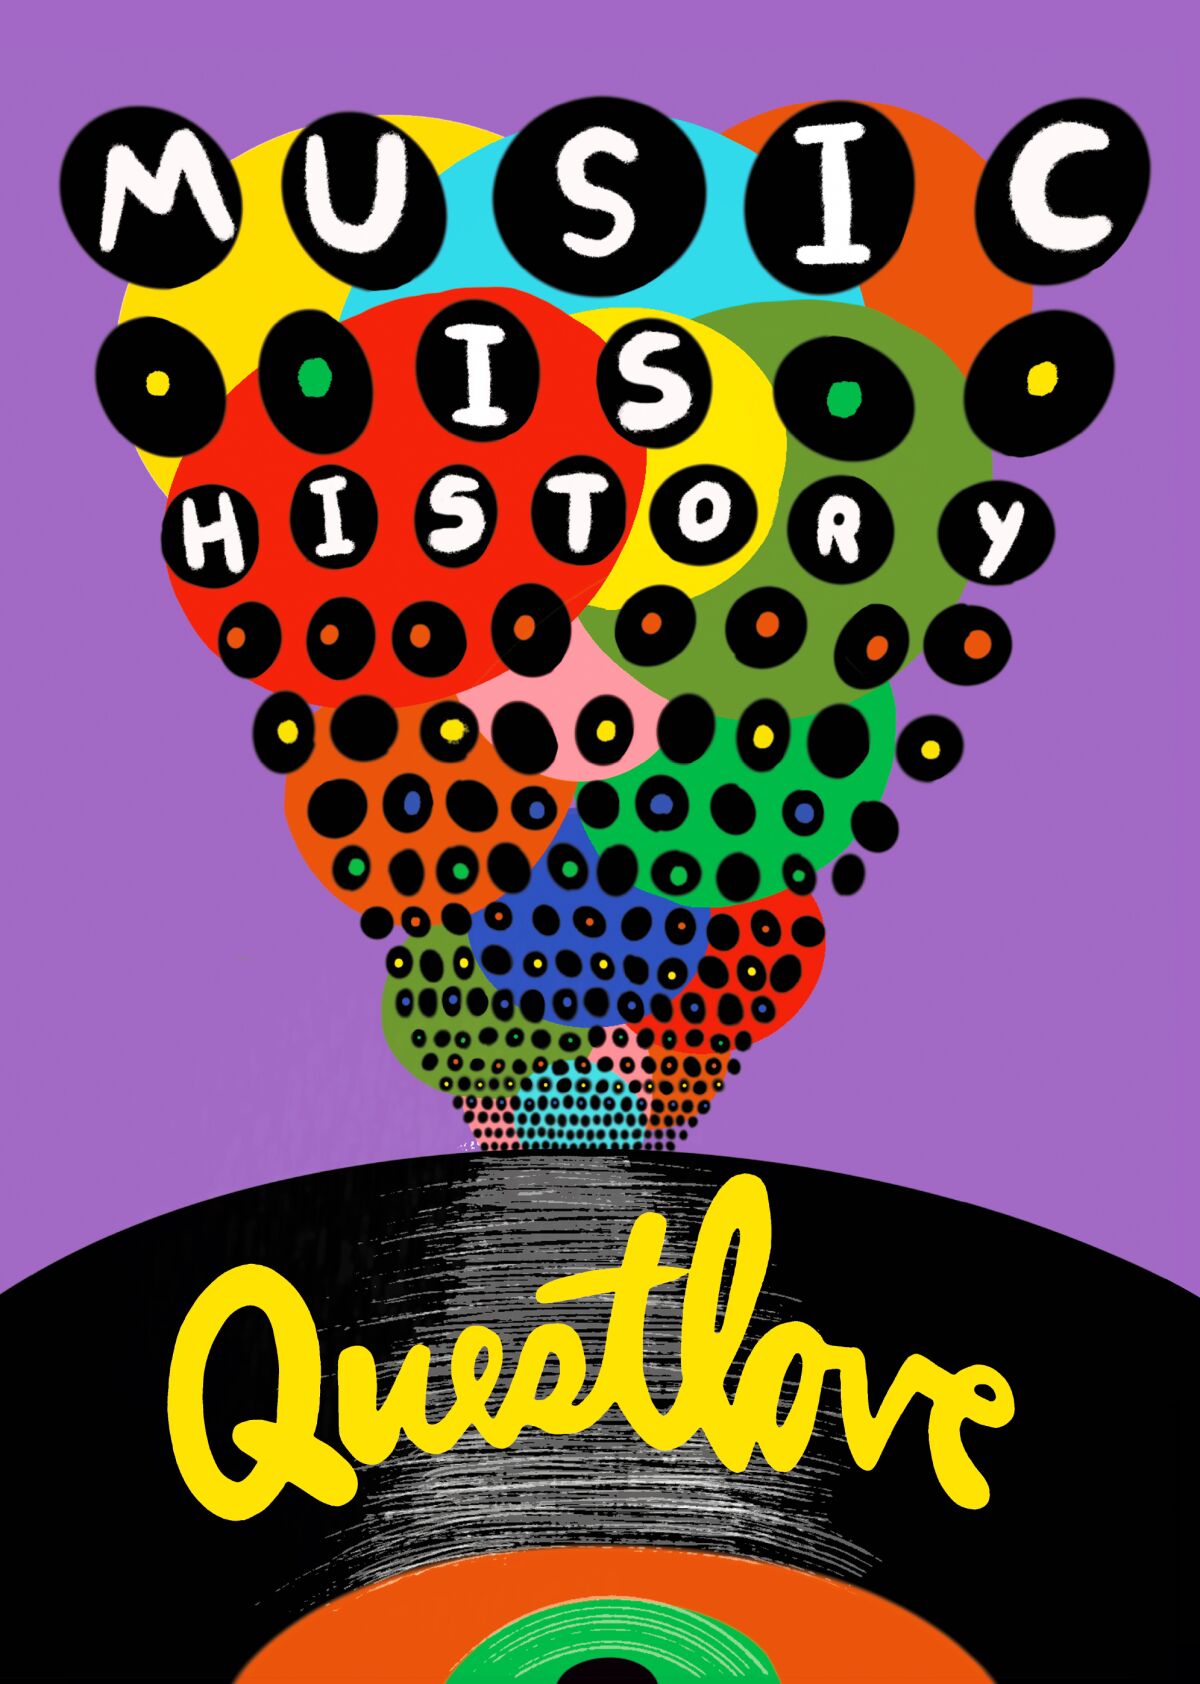 "Music is History" by Questlove book cover